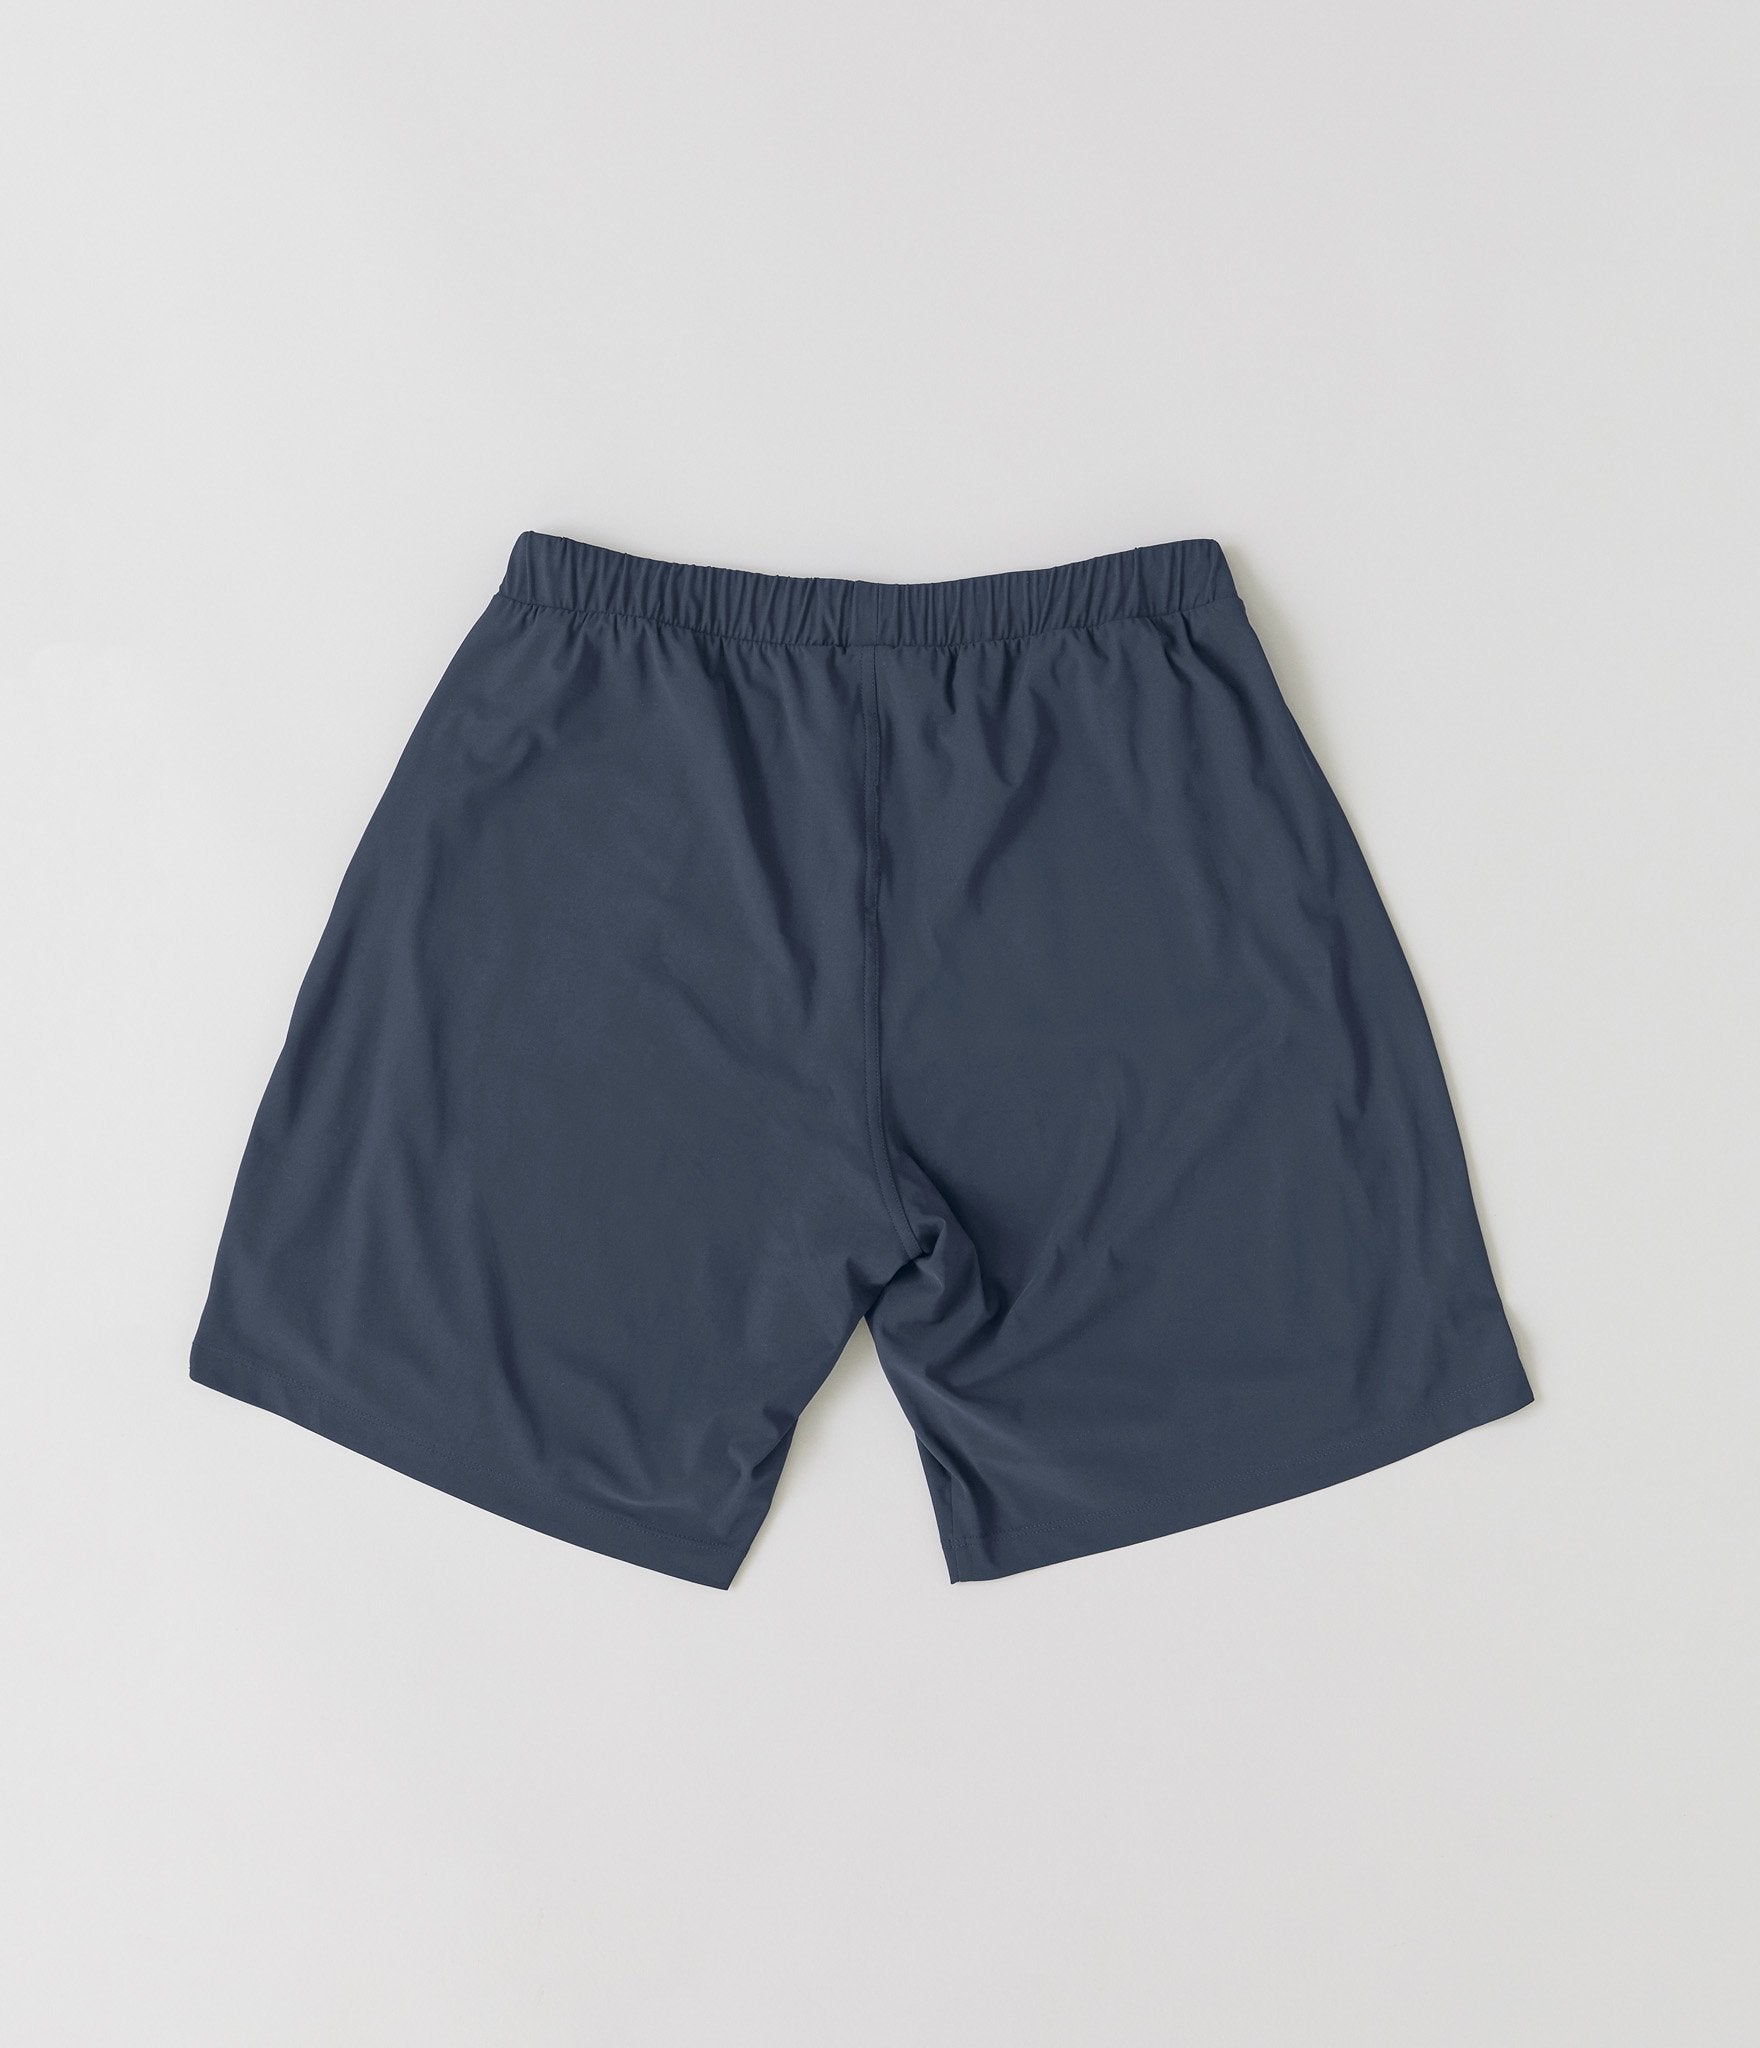 Cape Town shorts </br>Grey